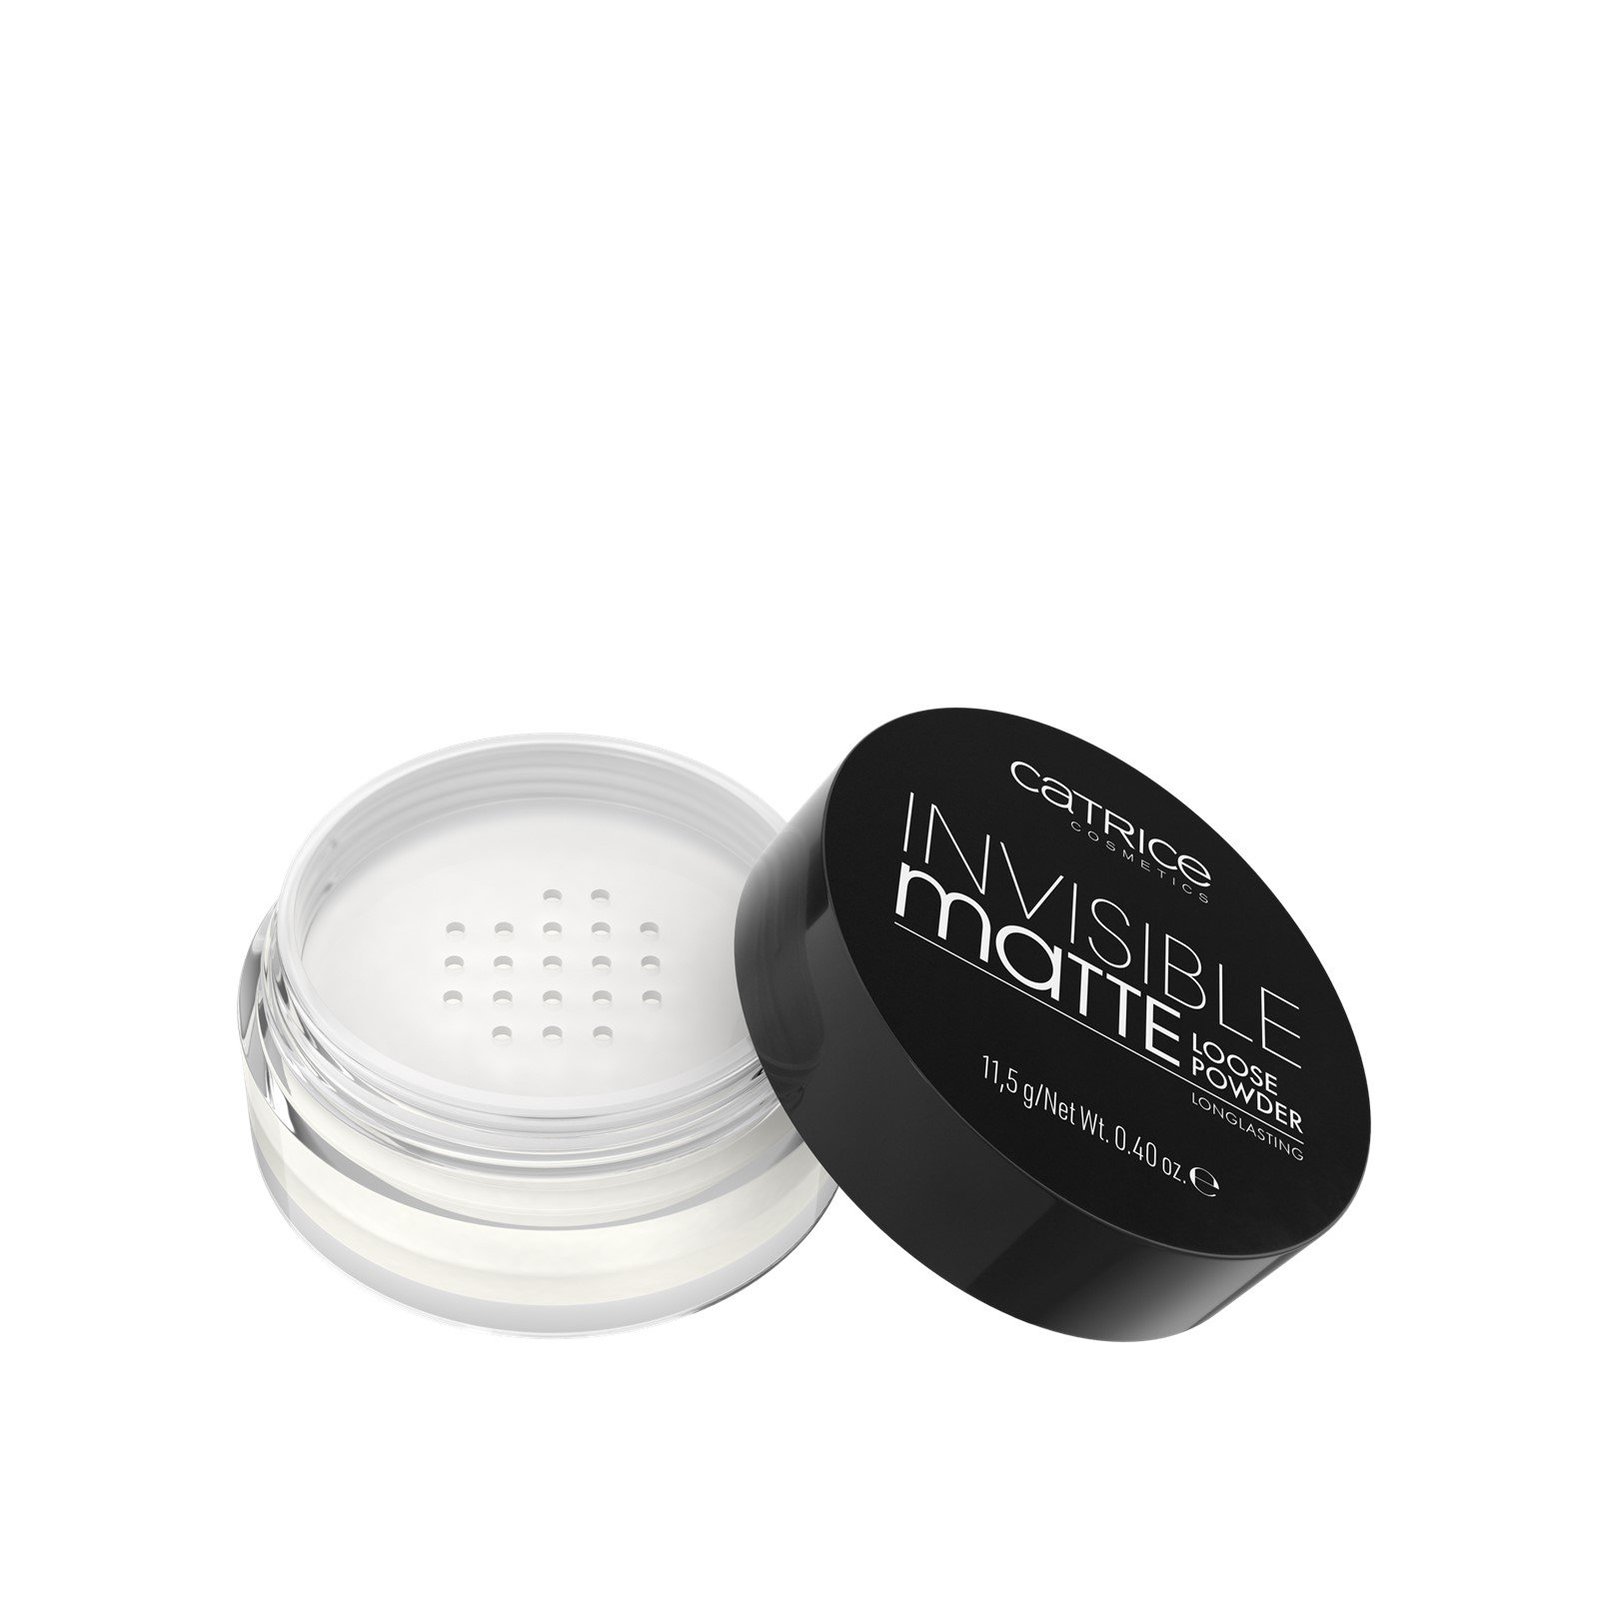 Catrice Invisible Matte Loose Powder 001 11.5g (0.40 oz)